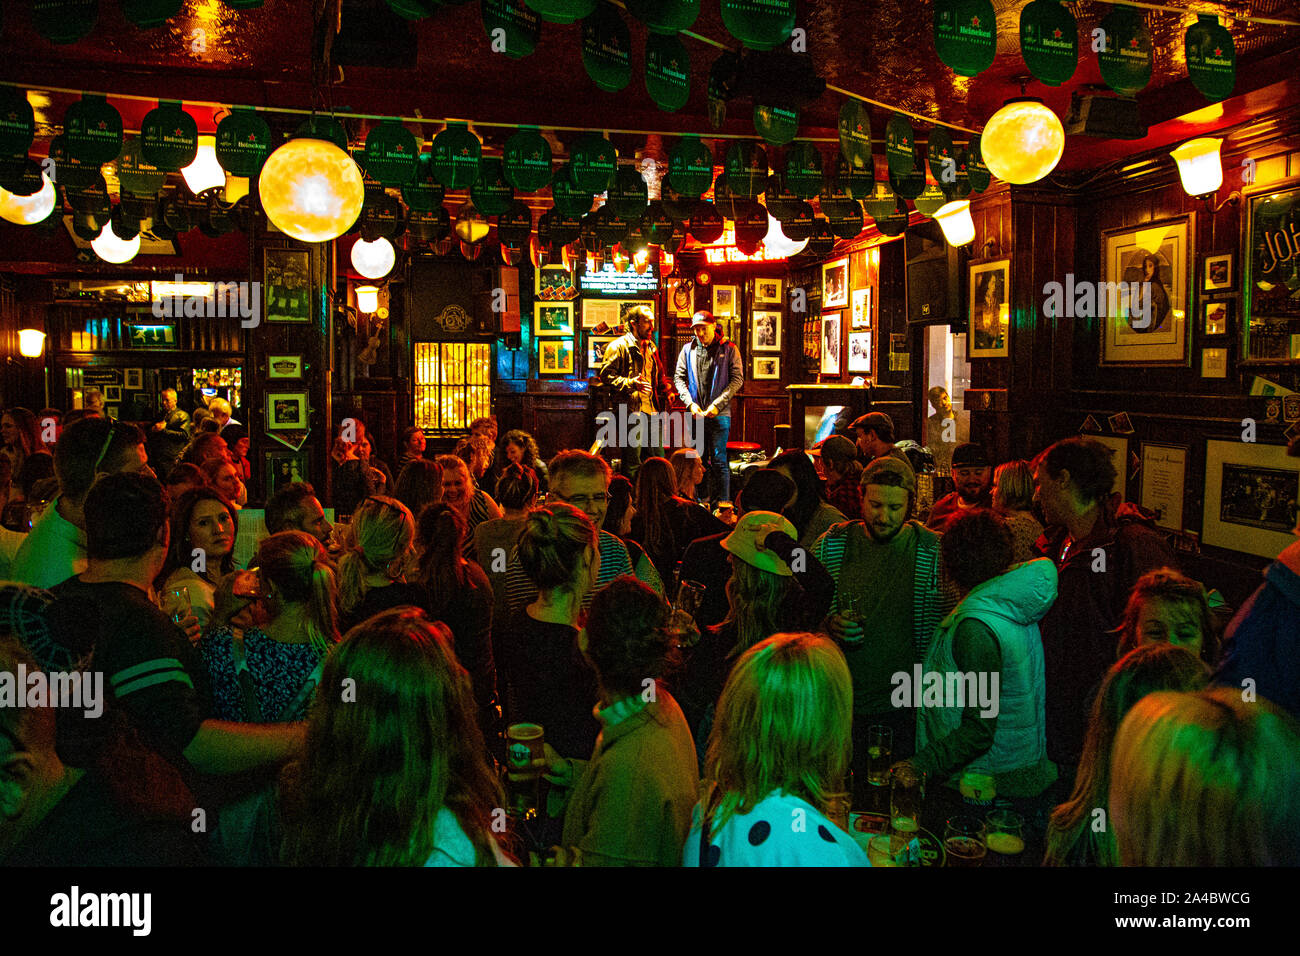 People taking and enjoying drinks at the Temple Bar, famous pub in Dublin, Ireland Stock Photo